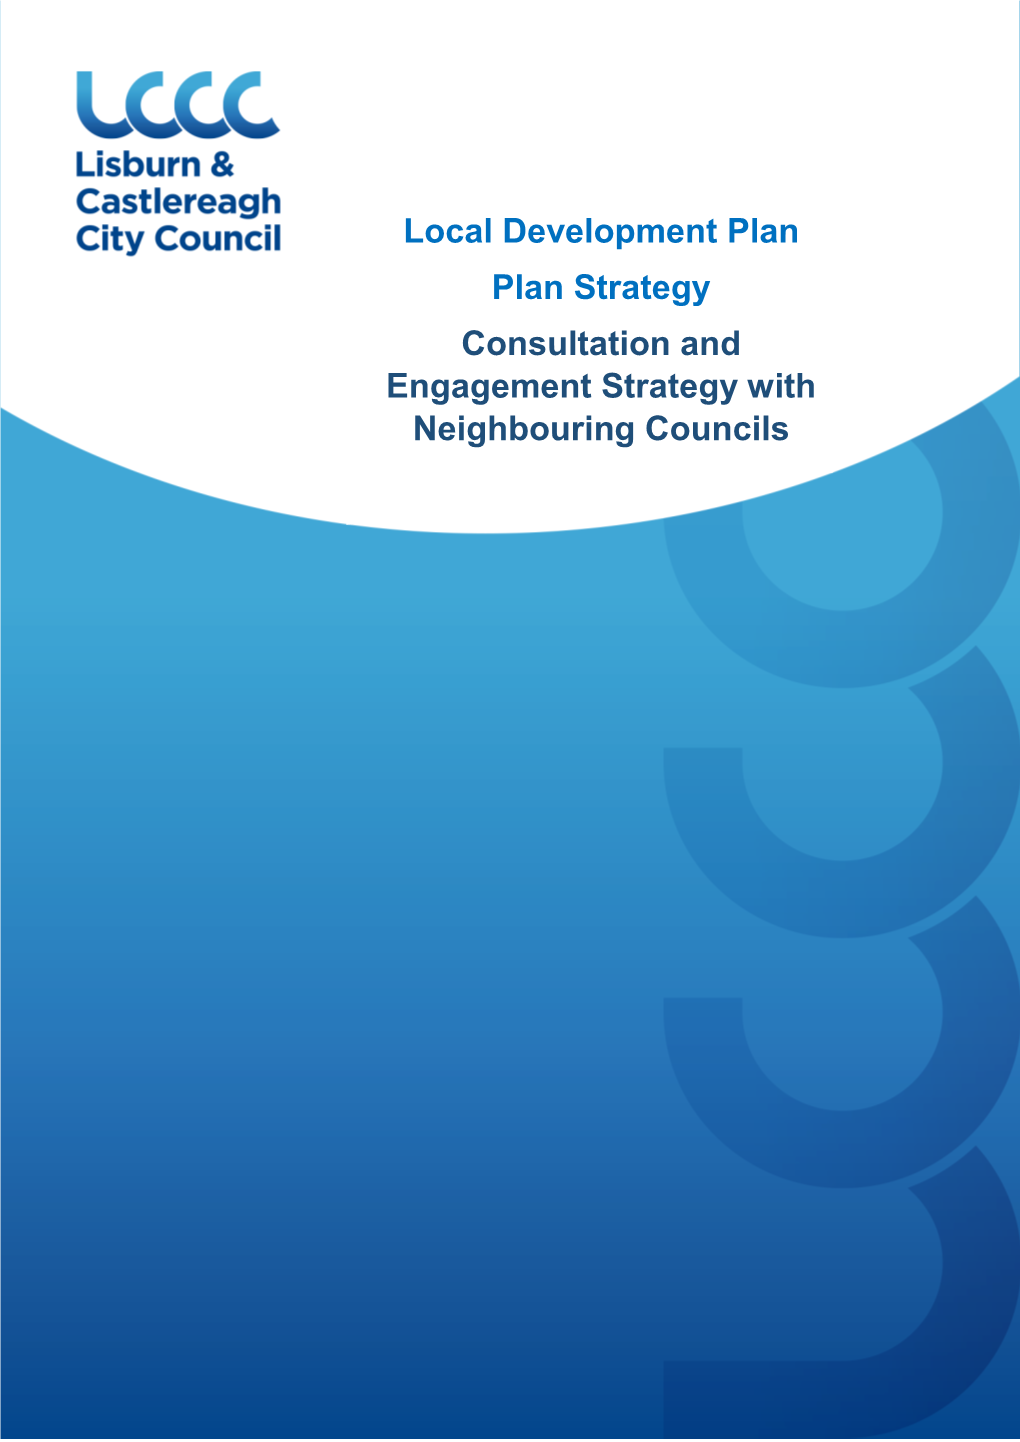 Consultation and Engagement Strategy with Neighbouring Councils